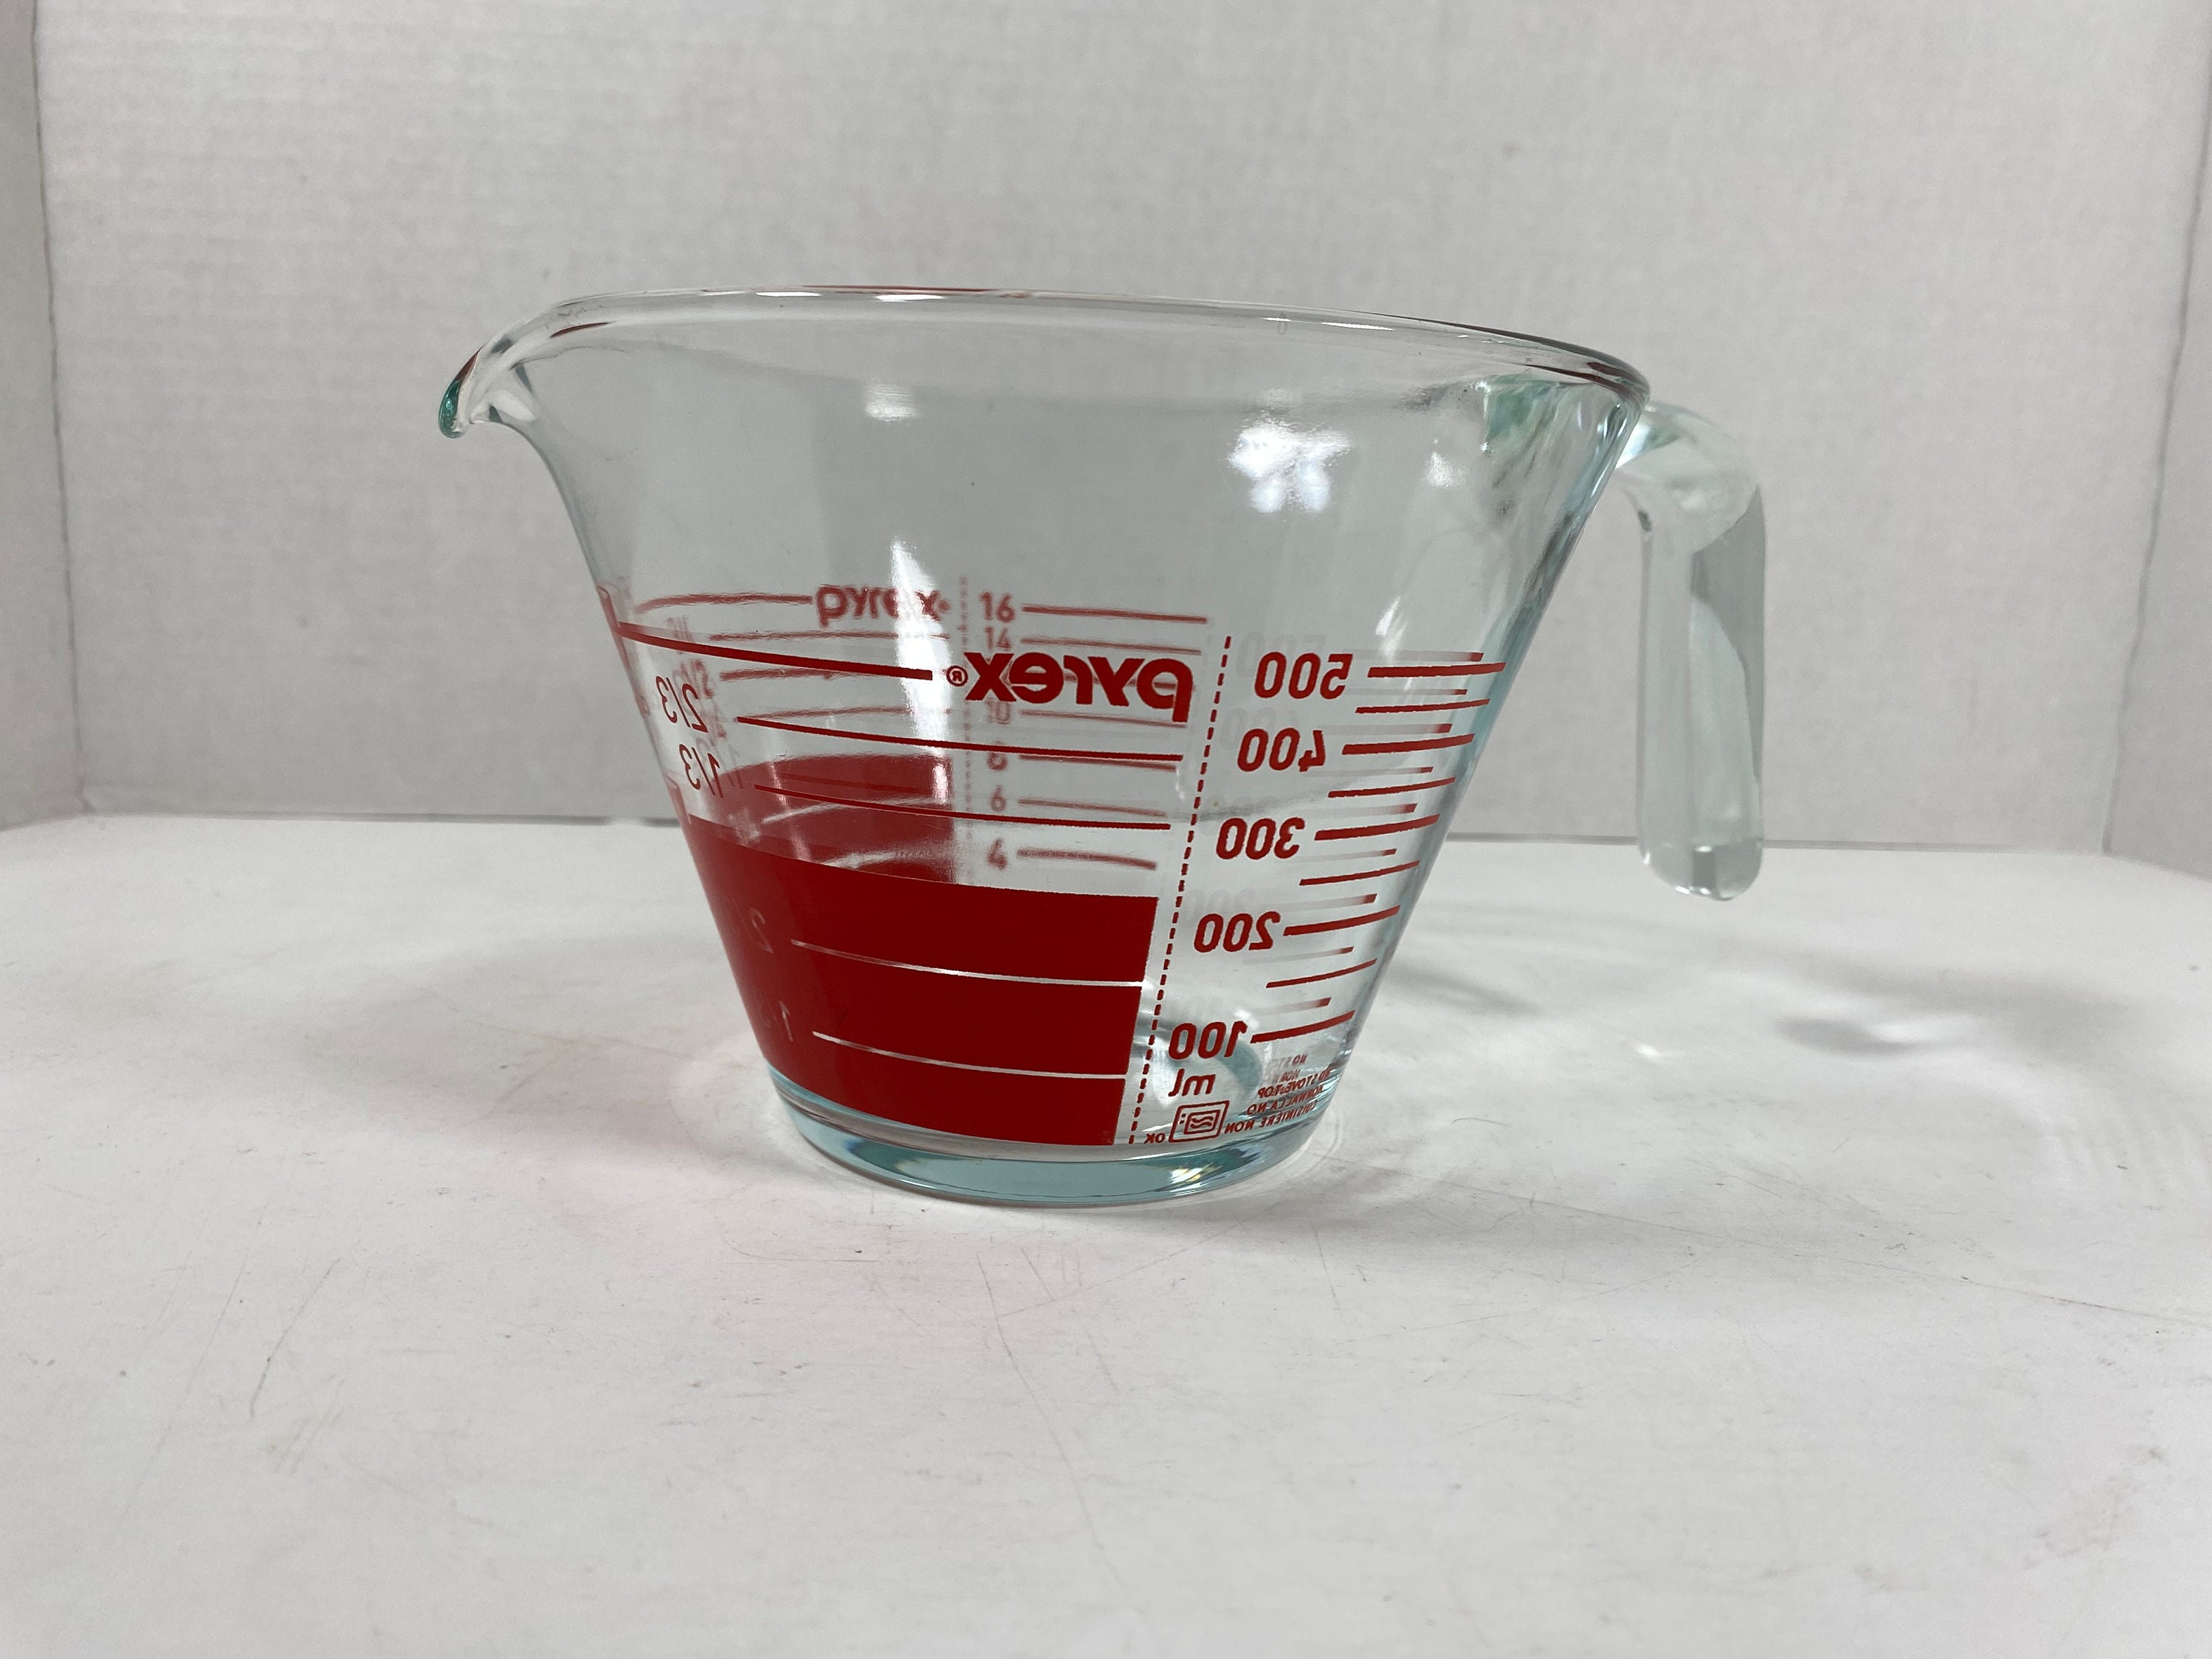 Vintage Glass Pyrex Measuring Cup With Open Handle by Corning, Five Star  Kitchen, 2 Cup Capacity, Model 516 